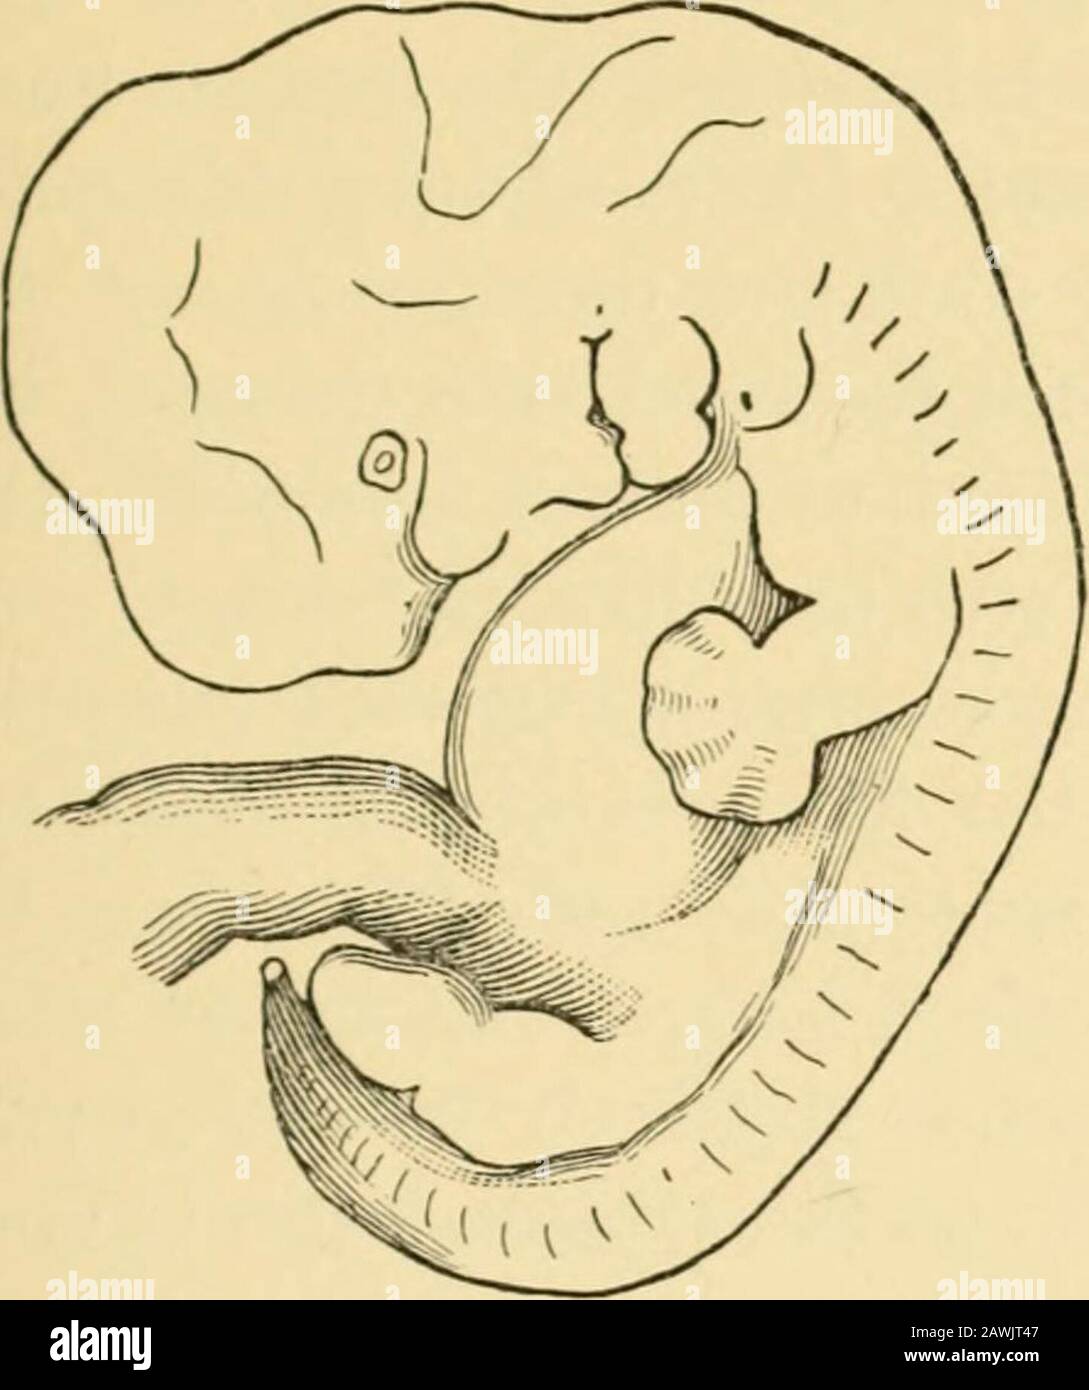 A system of obstetrics . lo-mesenteric arterv; . the the head; behind them may be seen vein : L. liver, with arriving and departingveins : D, intestine ; i, inferior cava : T. coc-cyx : (iU. allantois, with z, one umbilicalartery, and x, an umbilical vein. b, the omphalo-mesenteric arteries on umbilical vesicle: r. omphalo-mesenteric t]ie ear^ an(| m front arises the ex-ternal nose. The limbs are sepa-rated into their three divisions, andthe first suggestions of hands andith the fingers and toes webbed. The Wolffianbodies are much lessened in size, but the kidneys and suprarenalcapsules are no Stock Photo